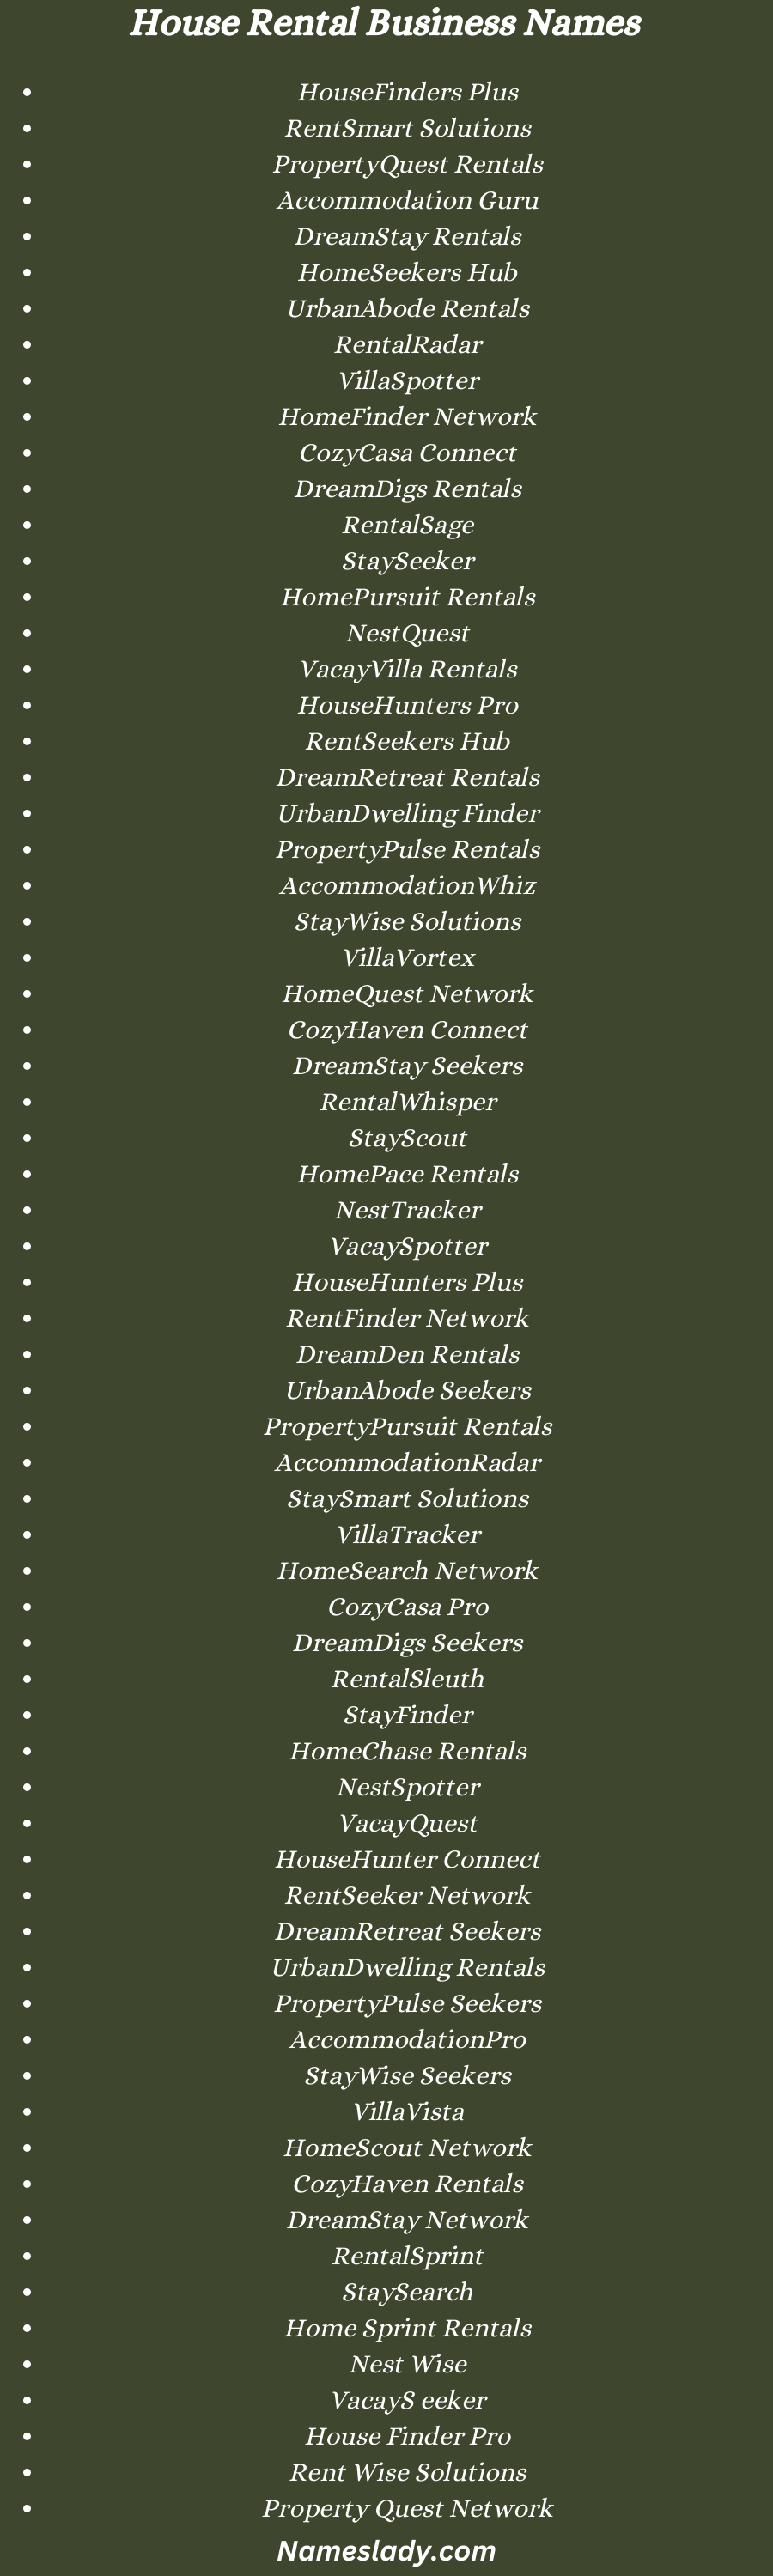 House Rental Business Names